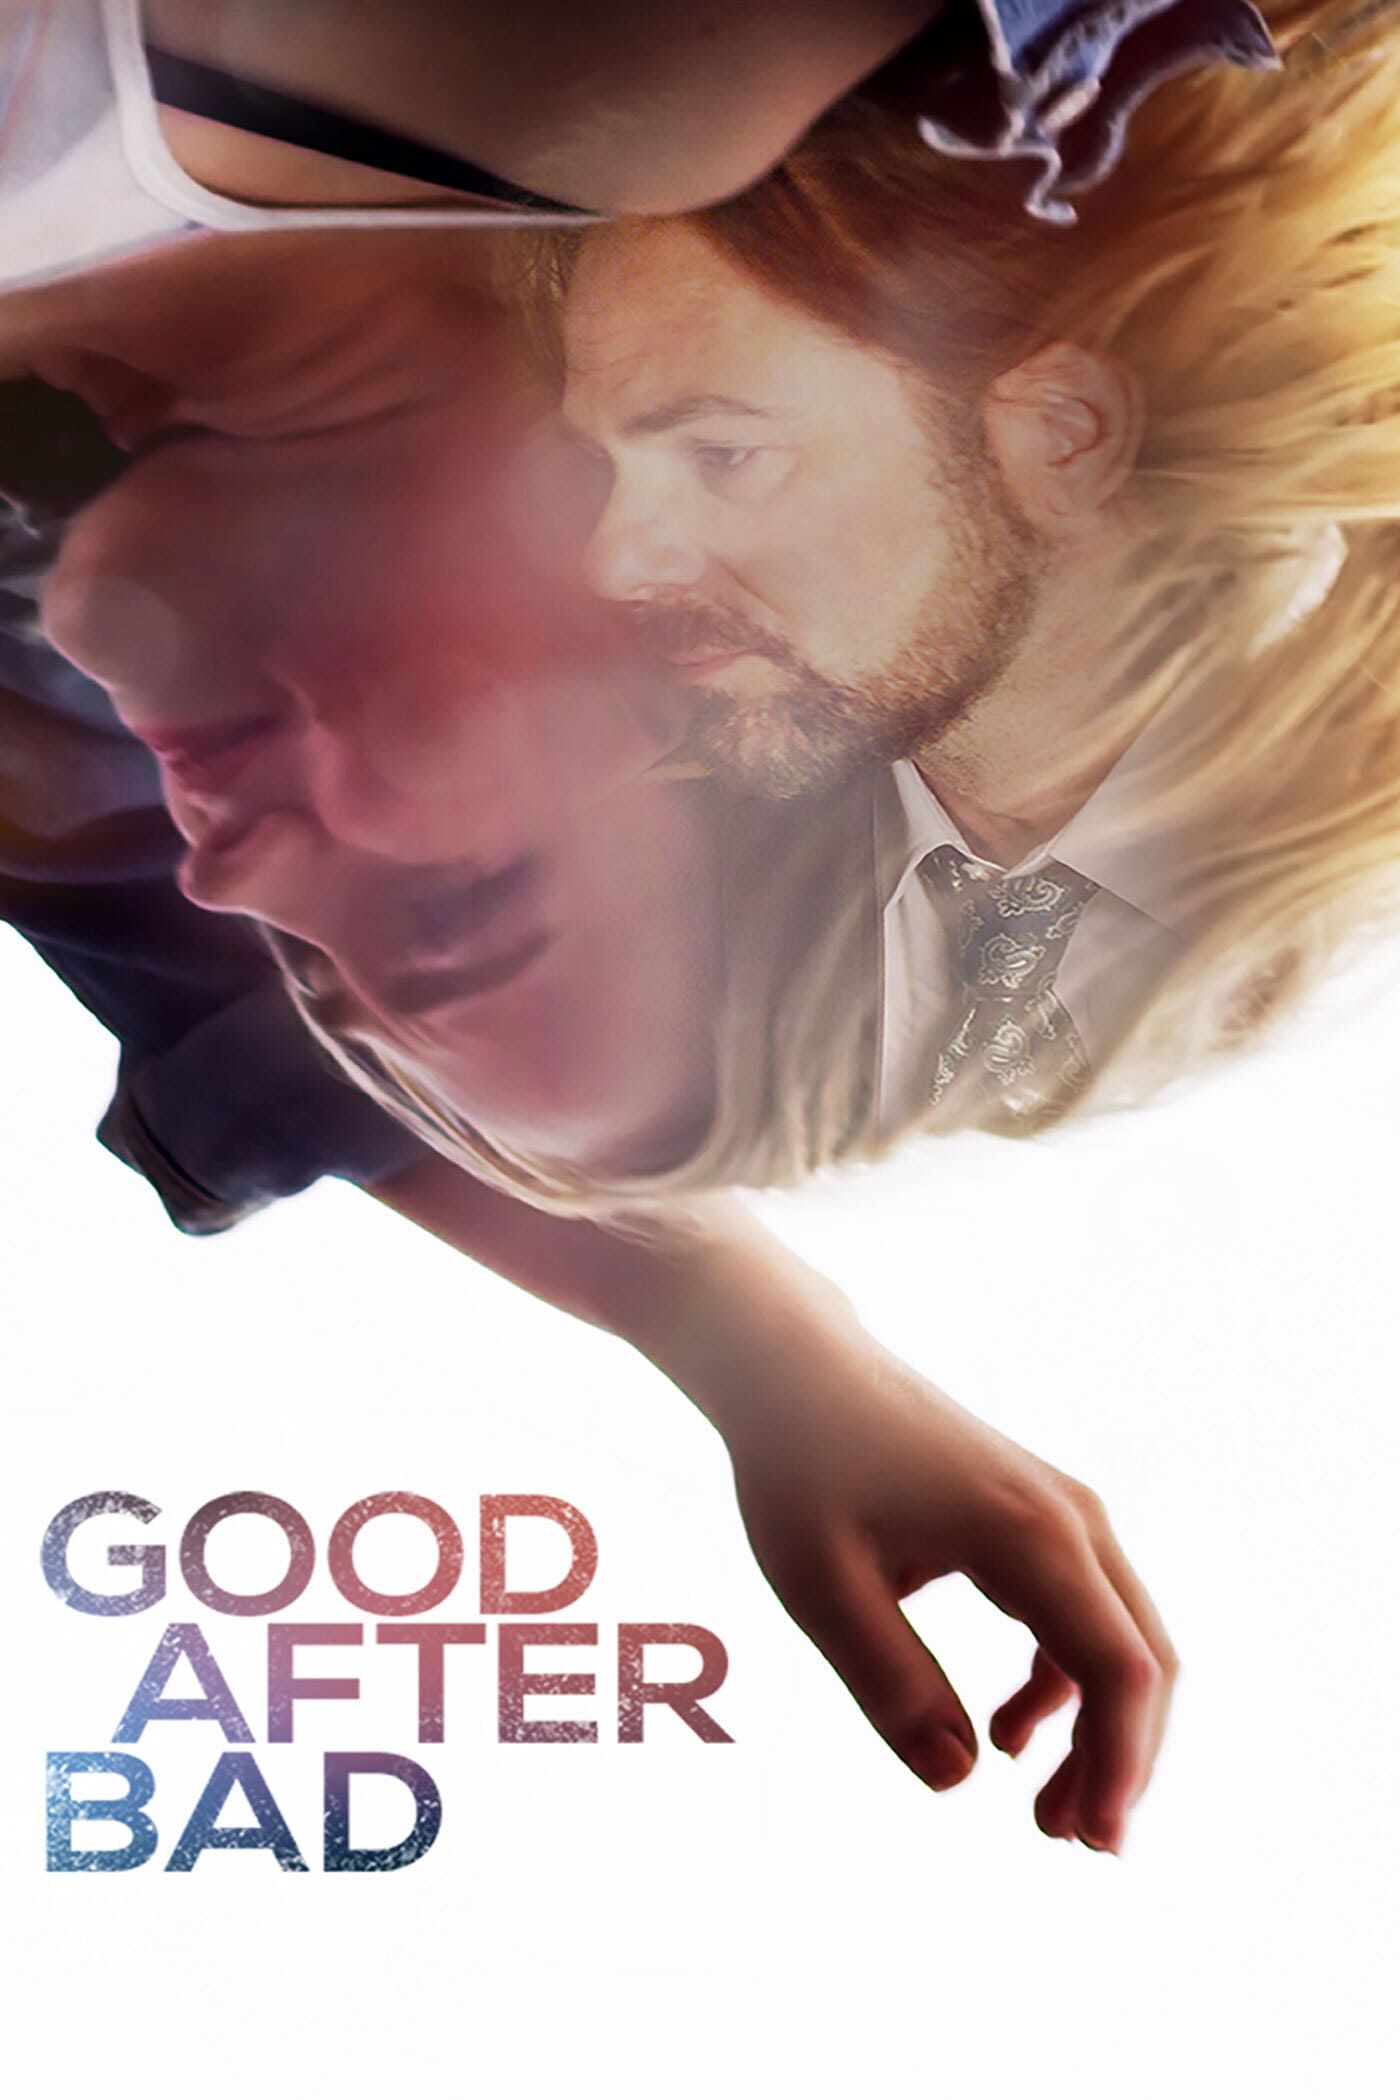 Watch Good After Bad (Tamil Dubbed) Movie Online for Free Anytime